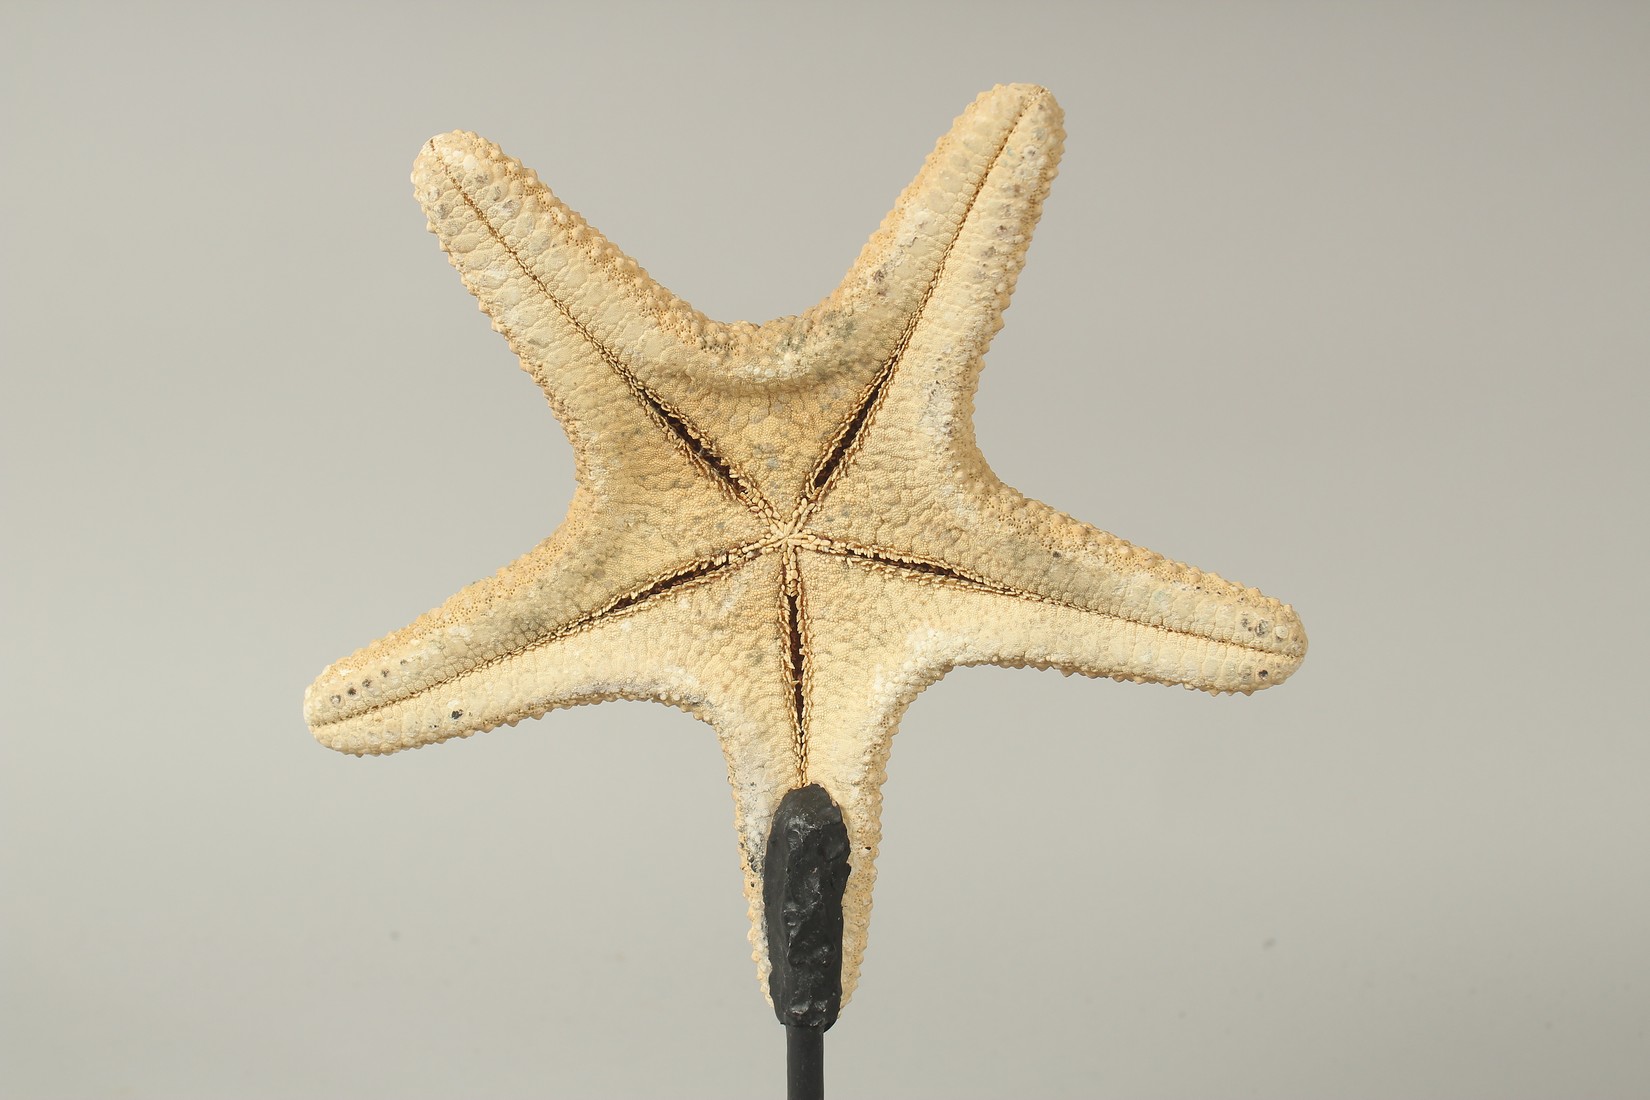 A STAR FISH SPECIMEN on a stand. - Image 3 of 3